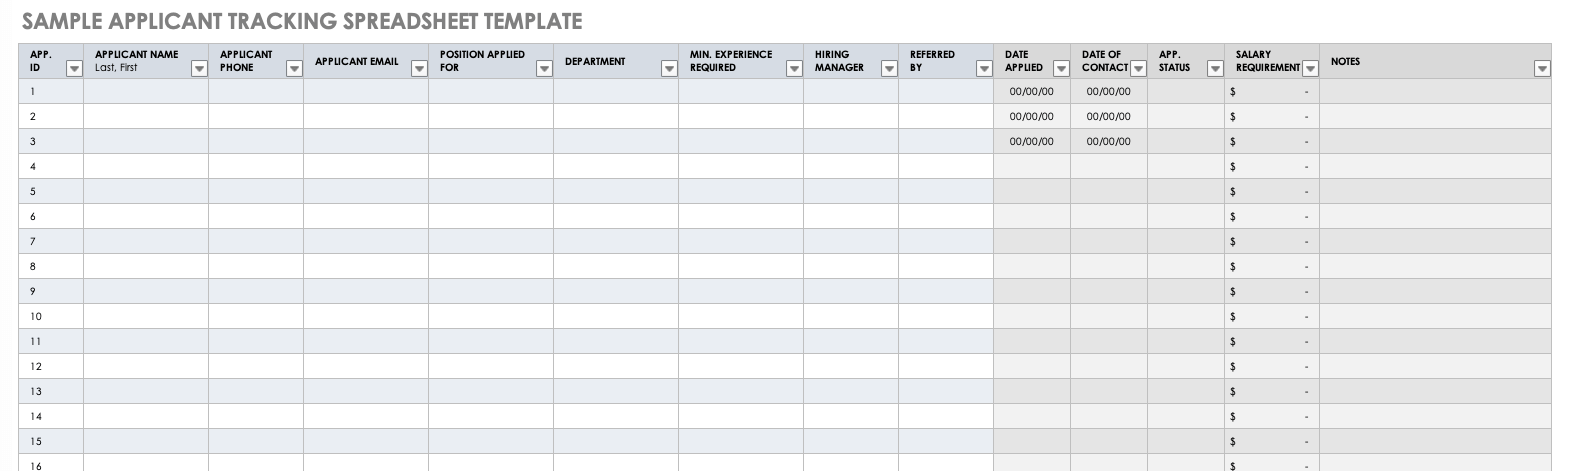 Sample Applicant Tracking Spreadsheet Template